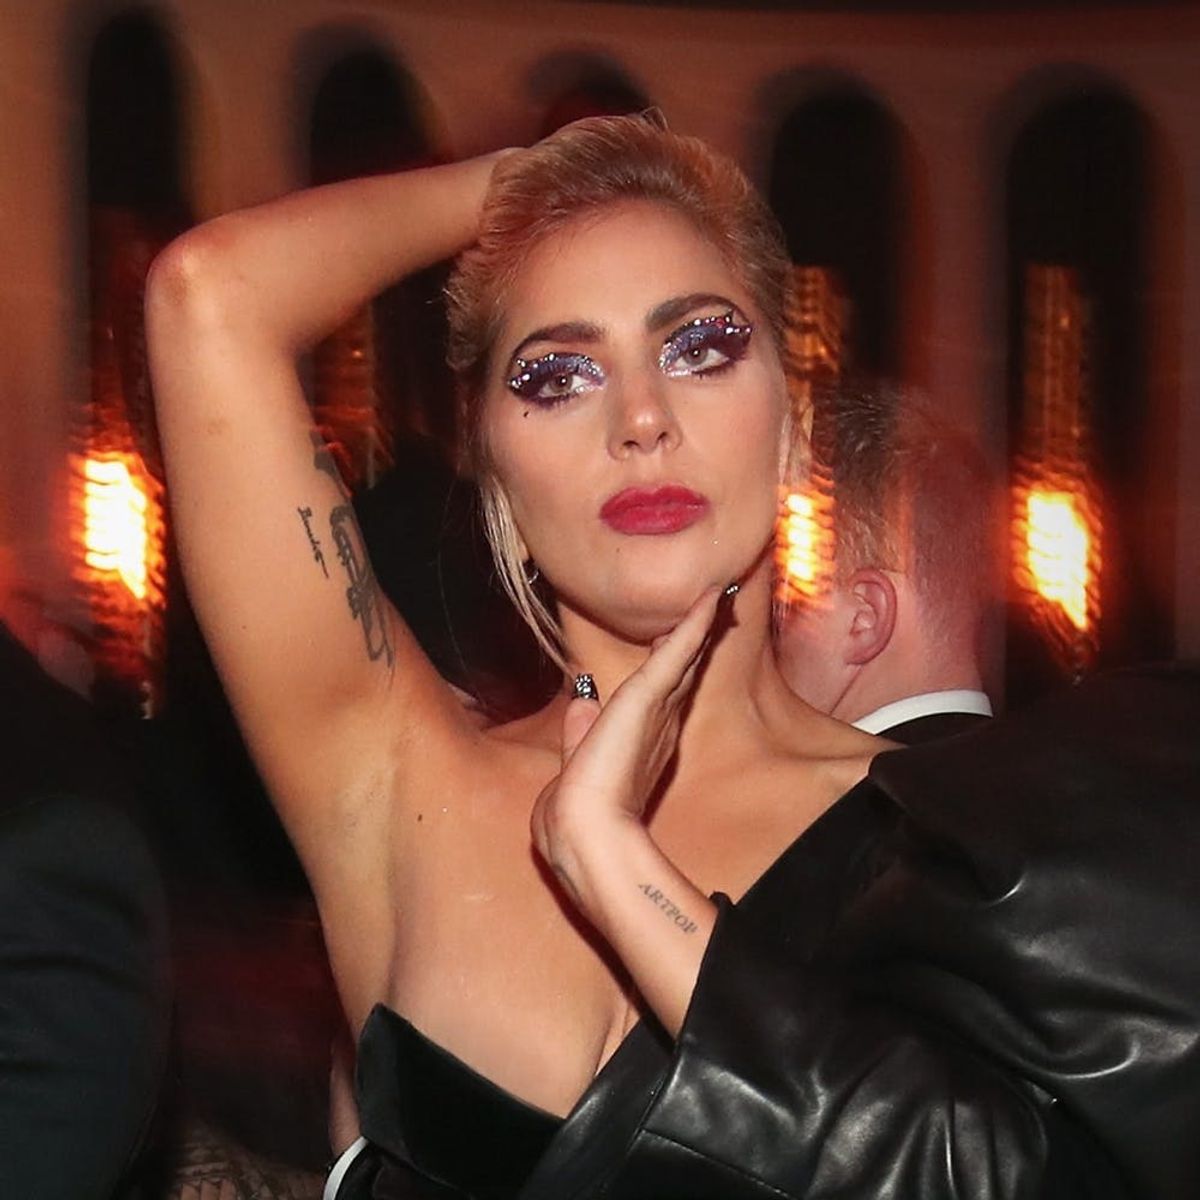 Lady Gaga Was a Starbucks Barista for a Day and We’re All Kinds of Jealous